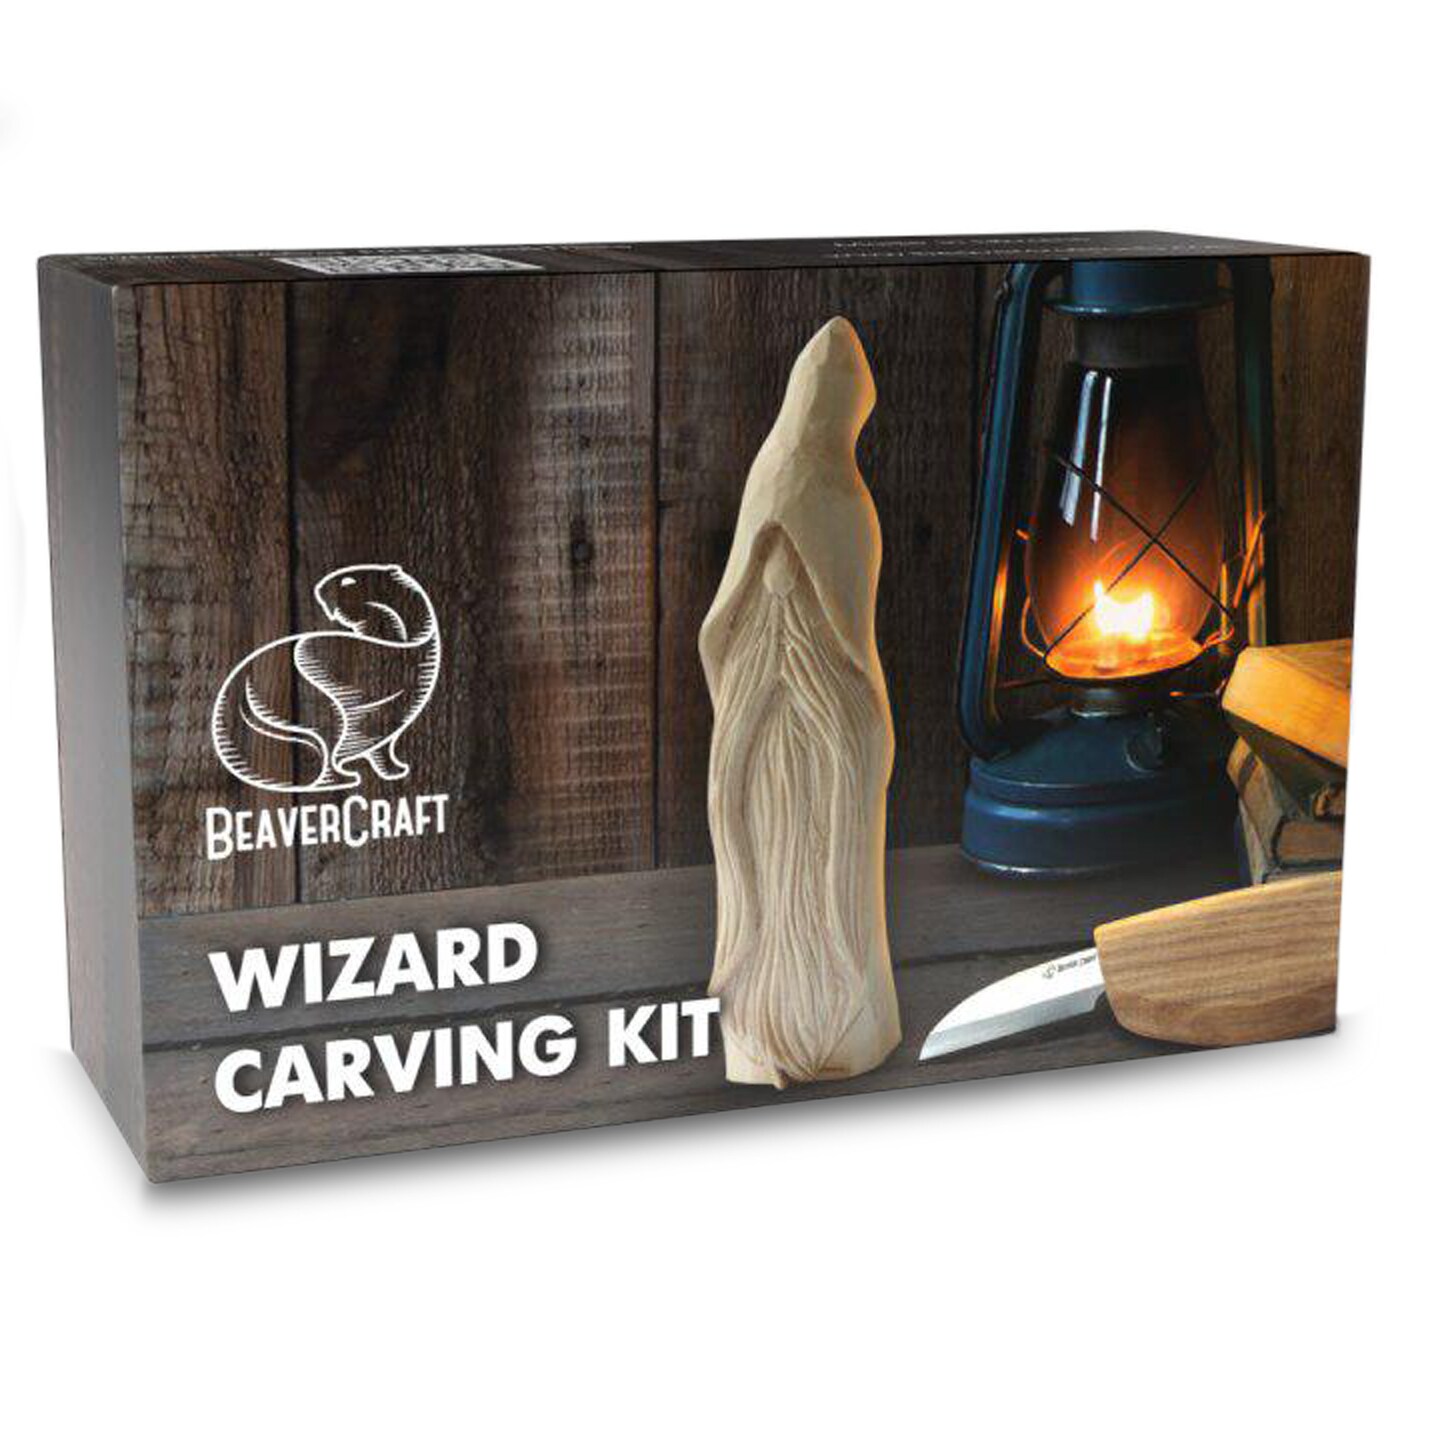 BeaverCraft Wood Whittling Kit for Beginners DIY03 Wizard - Wood Carving Tools Woodworking Kit for Adults and Teens